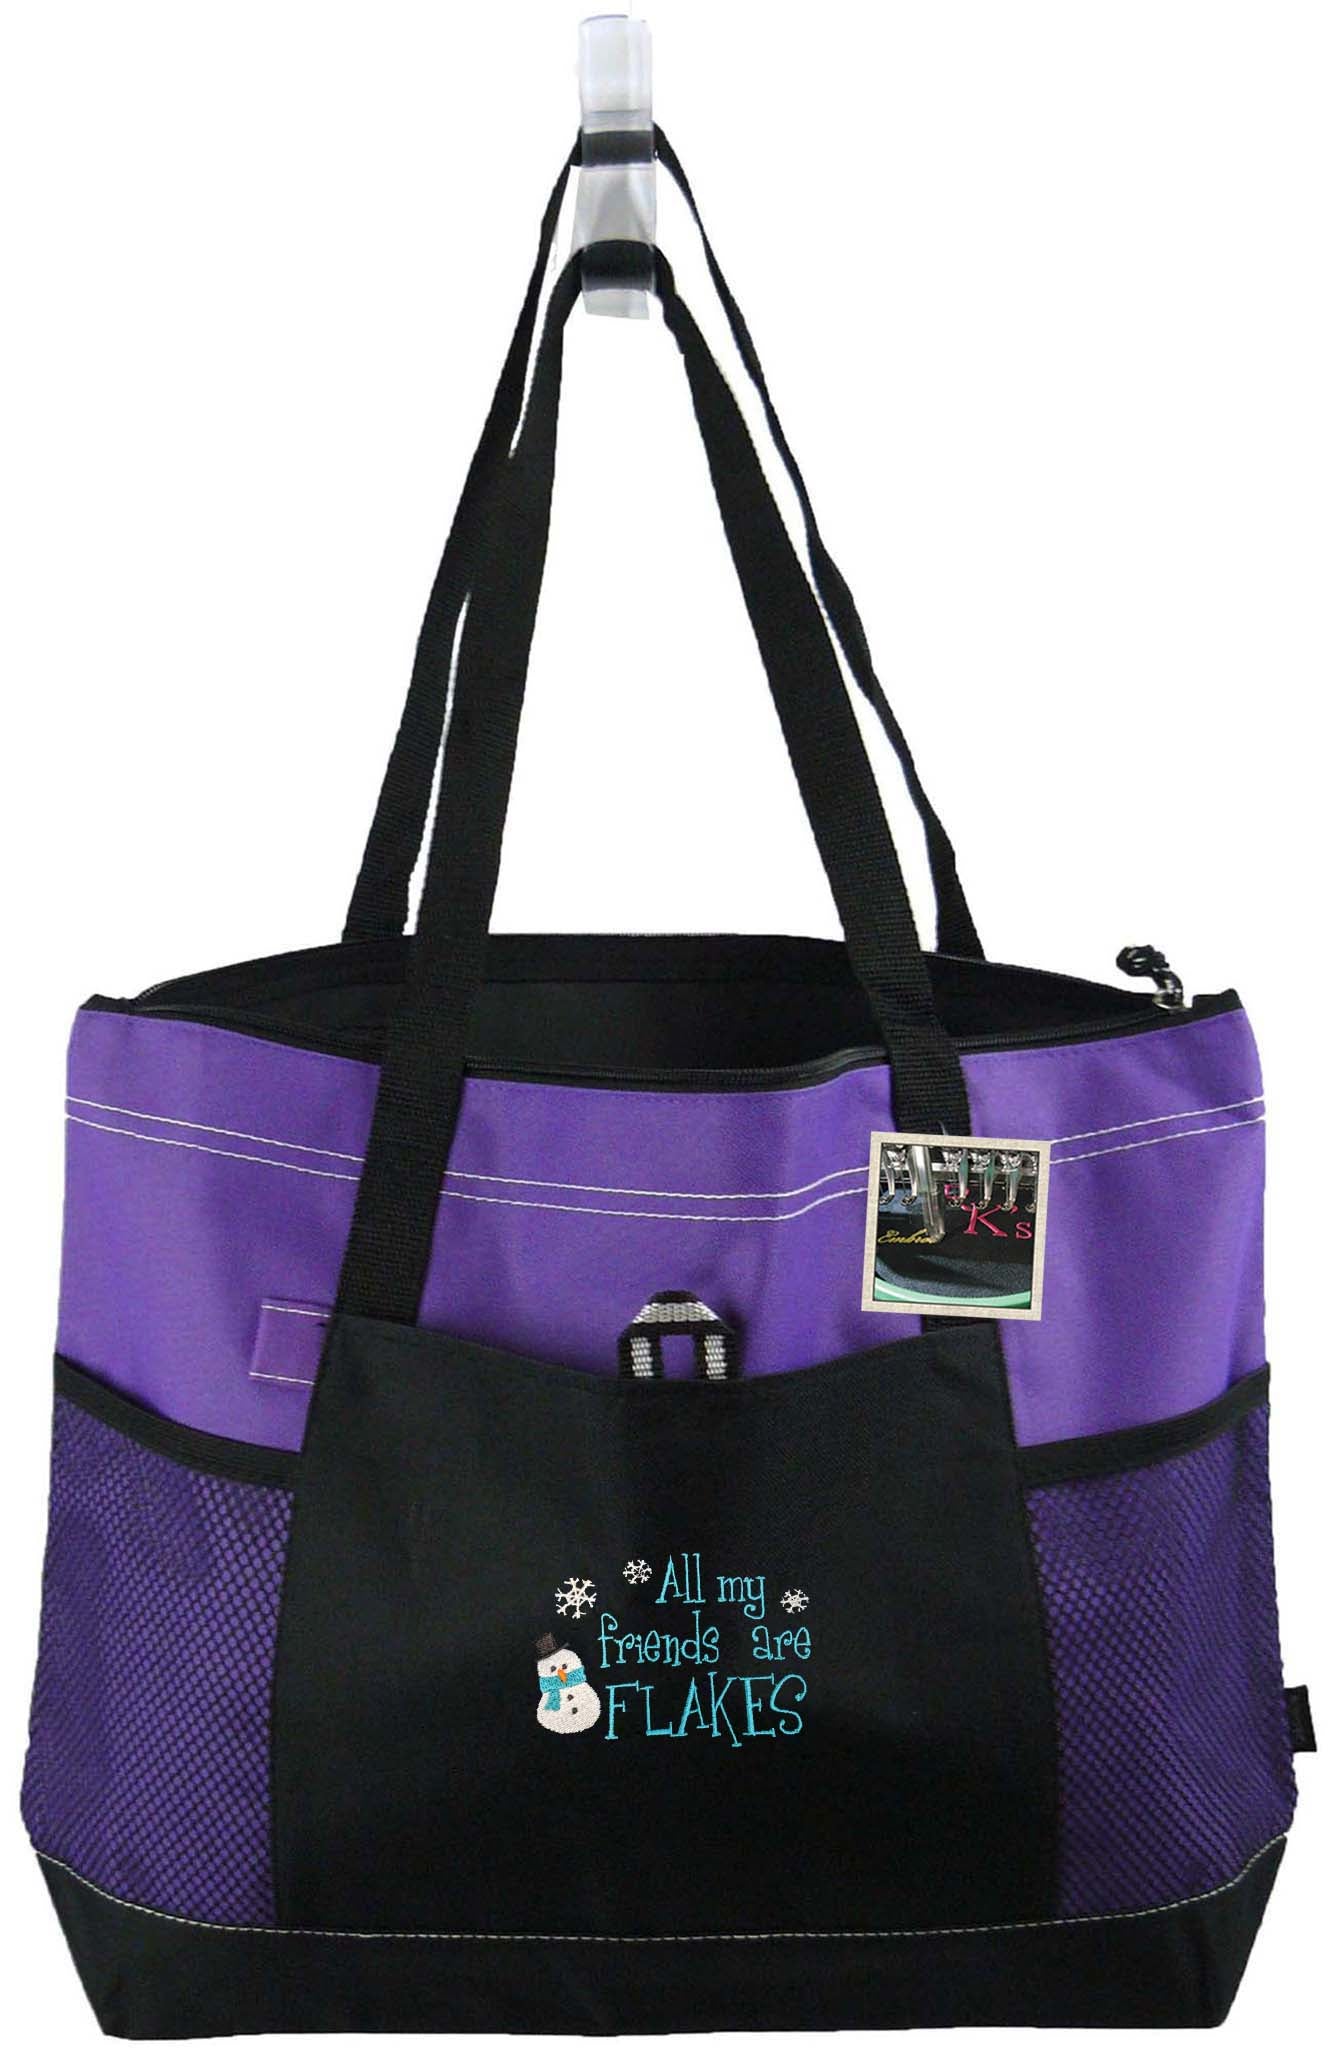 All My Friends Are Flakes, Purple Gemline Select Zipper Tote Bag